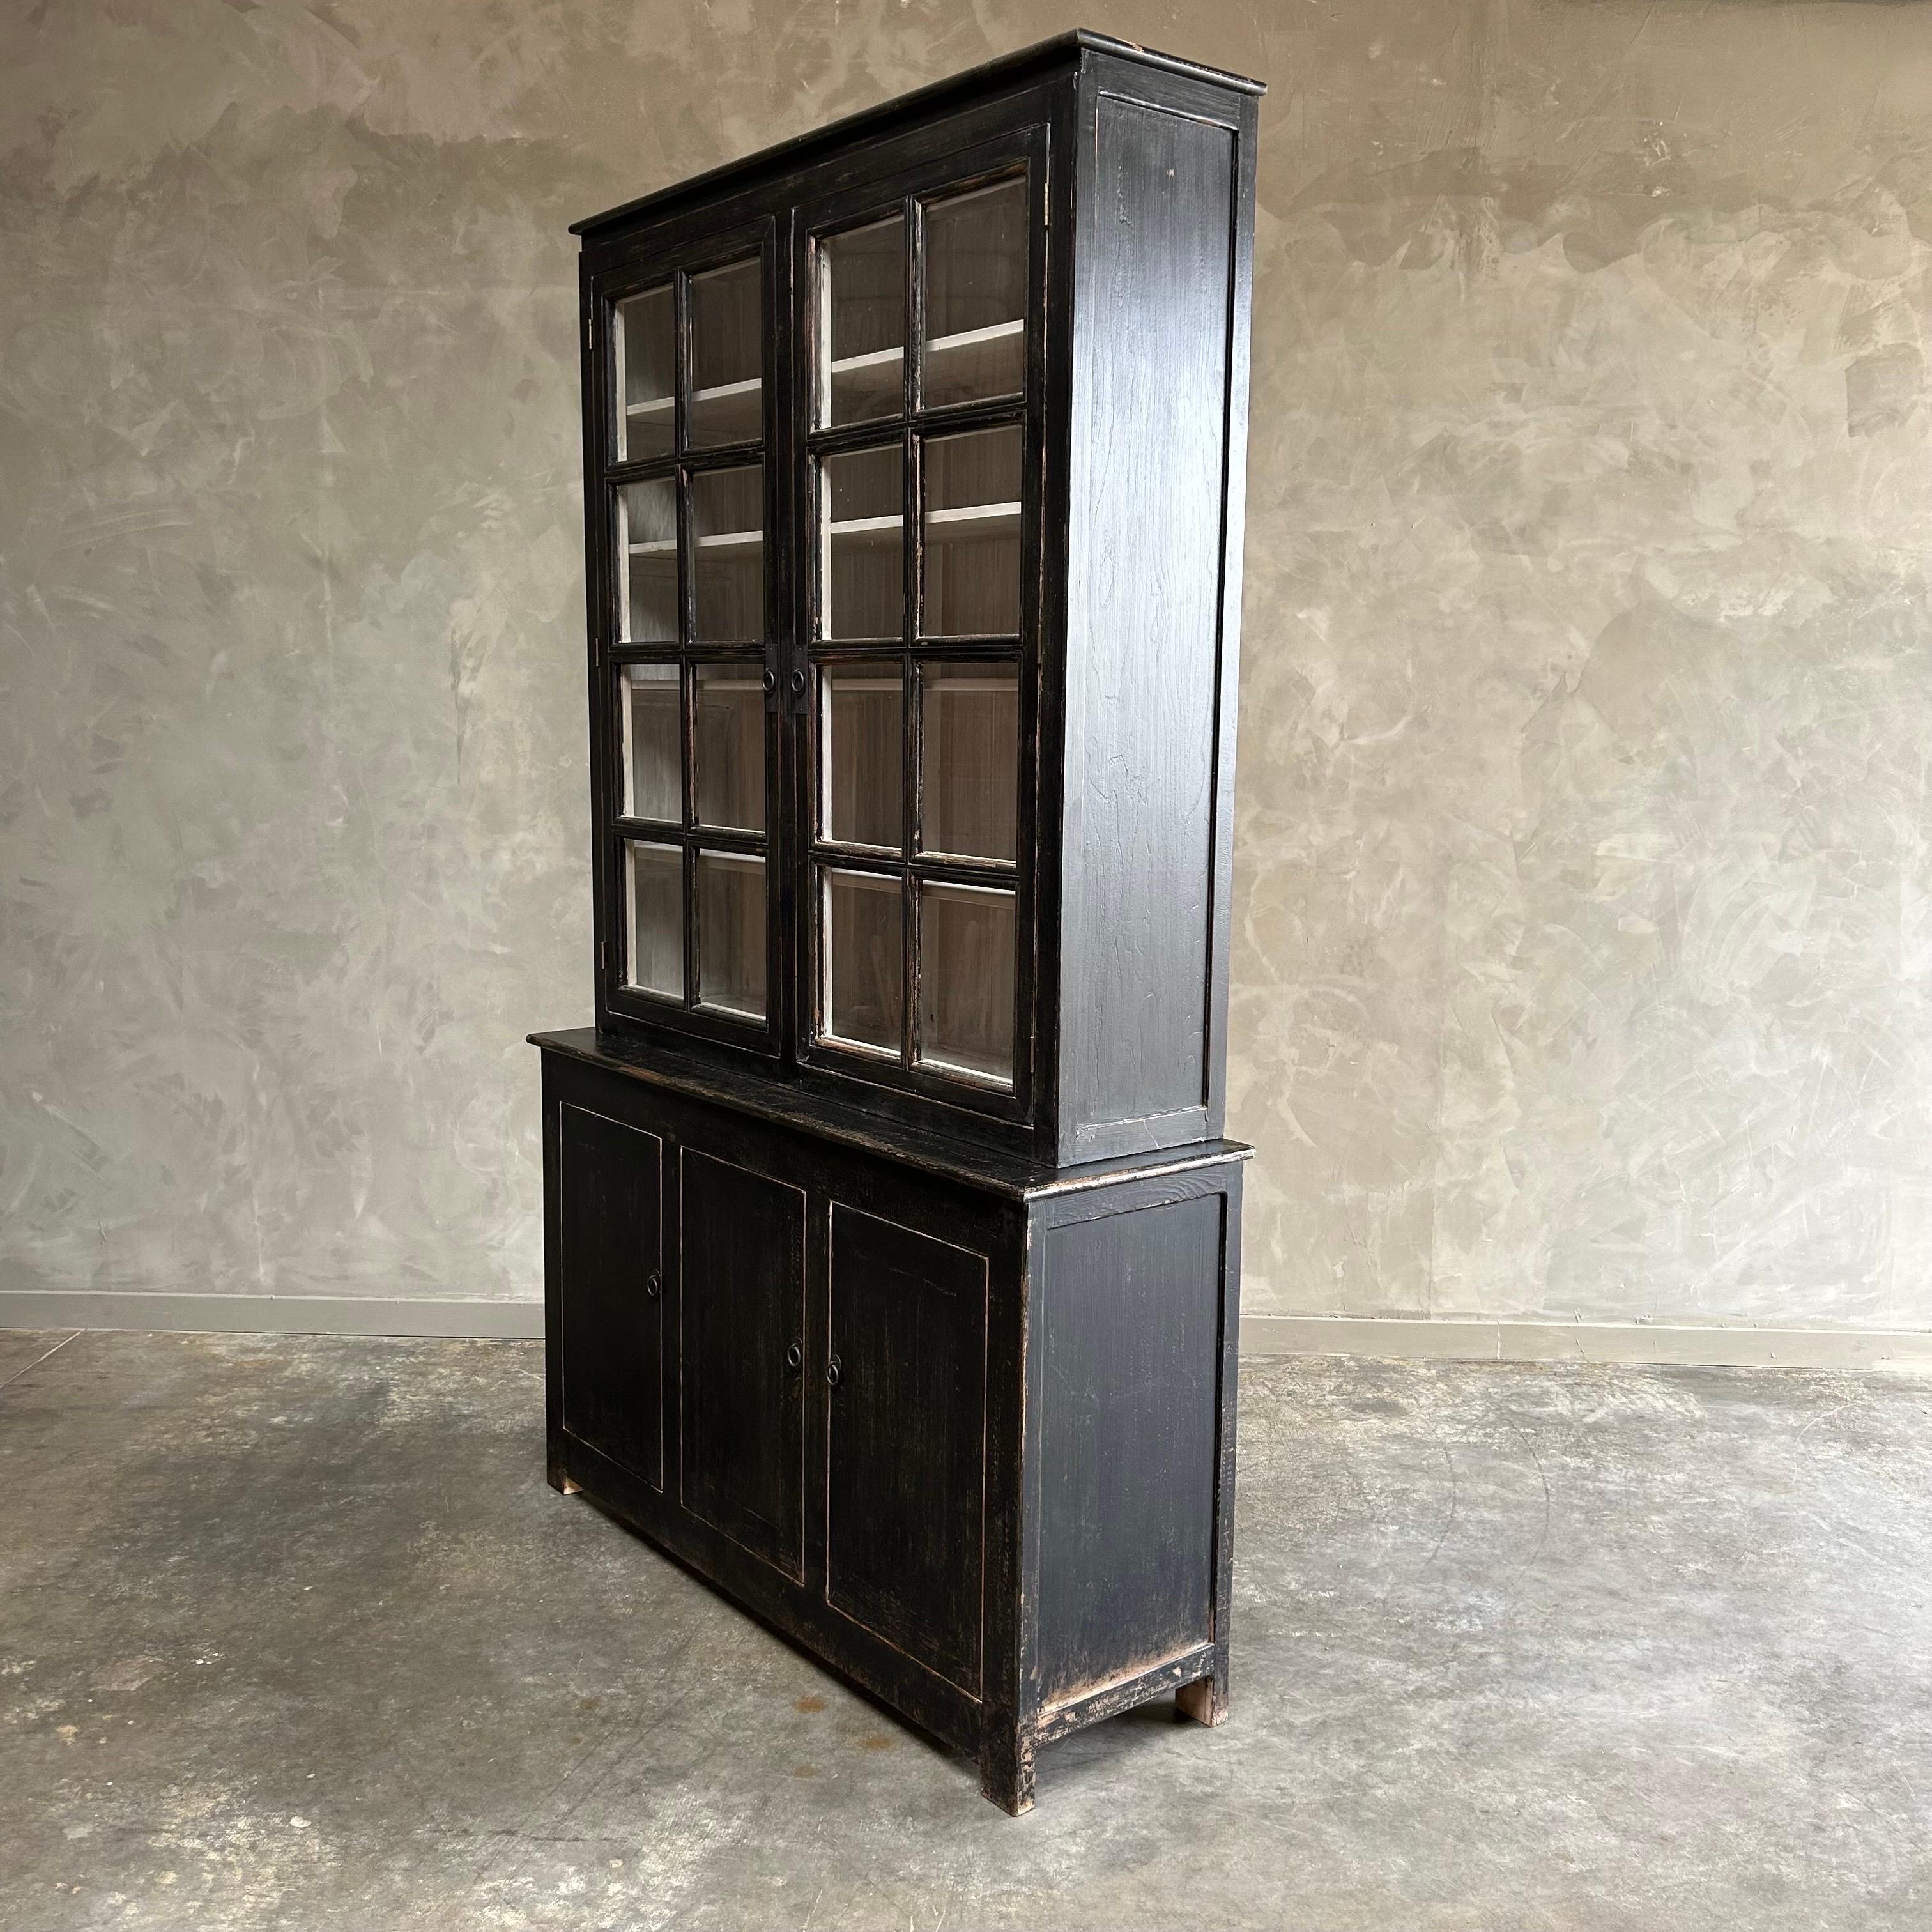 Pine Vintage Style Reclaimed Wood Hutch in Distressed Black Finish